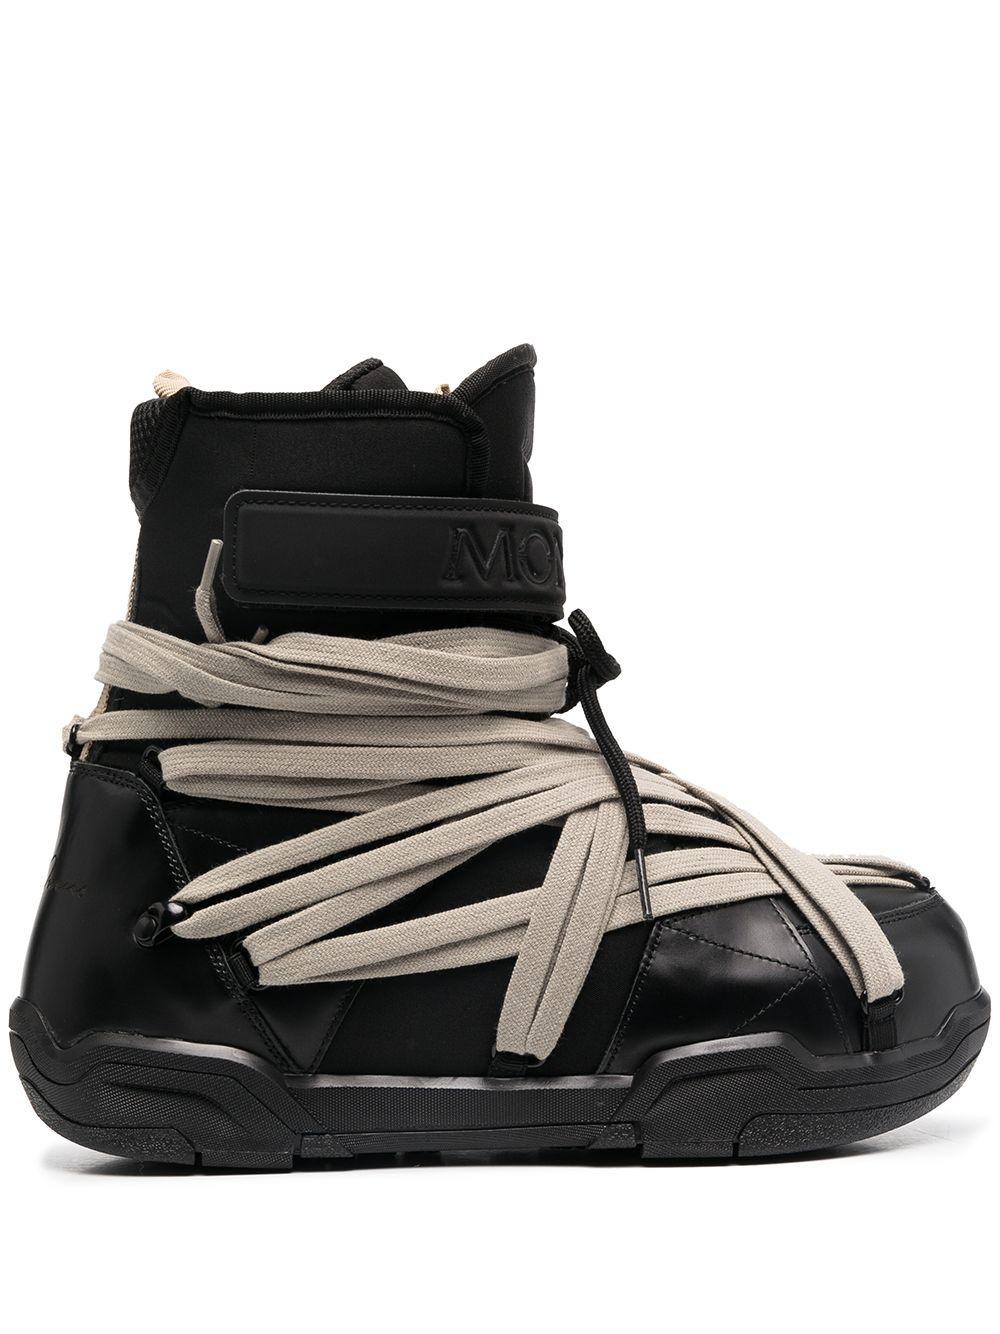 Rick Owens X Moncler Stivali Tessuto Boots in Black for Men | Lyst